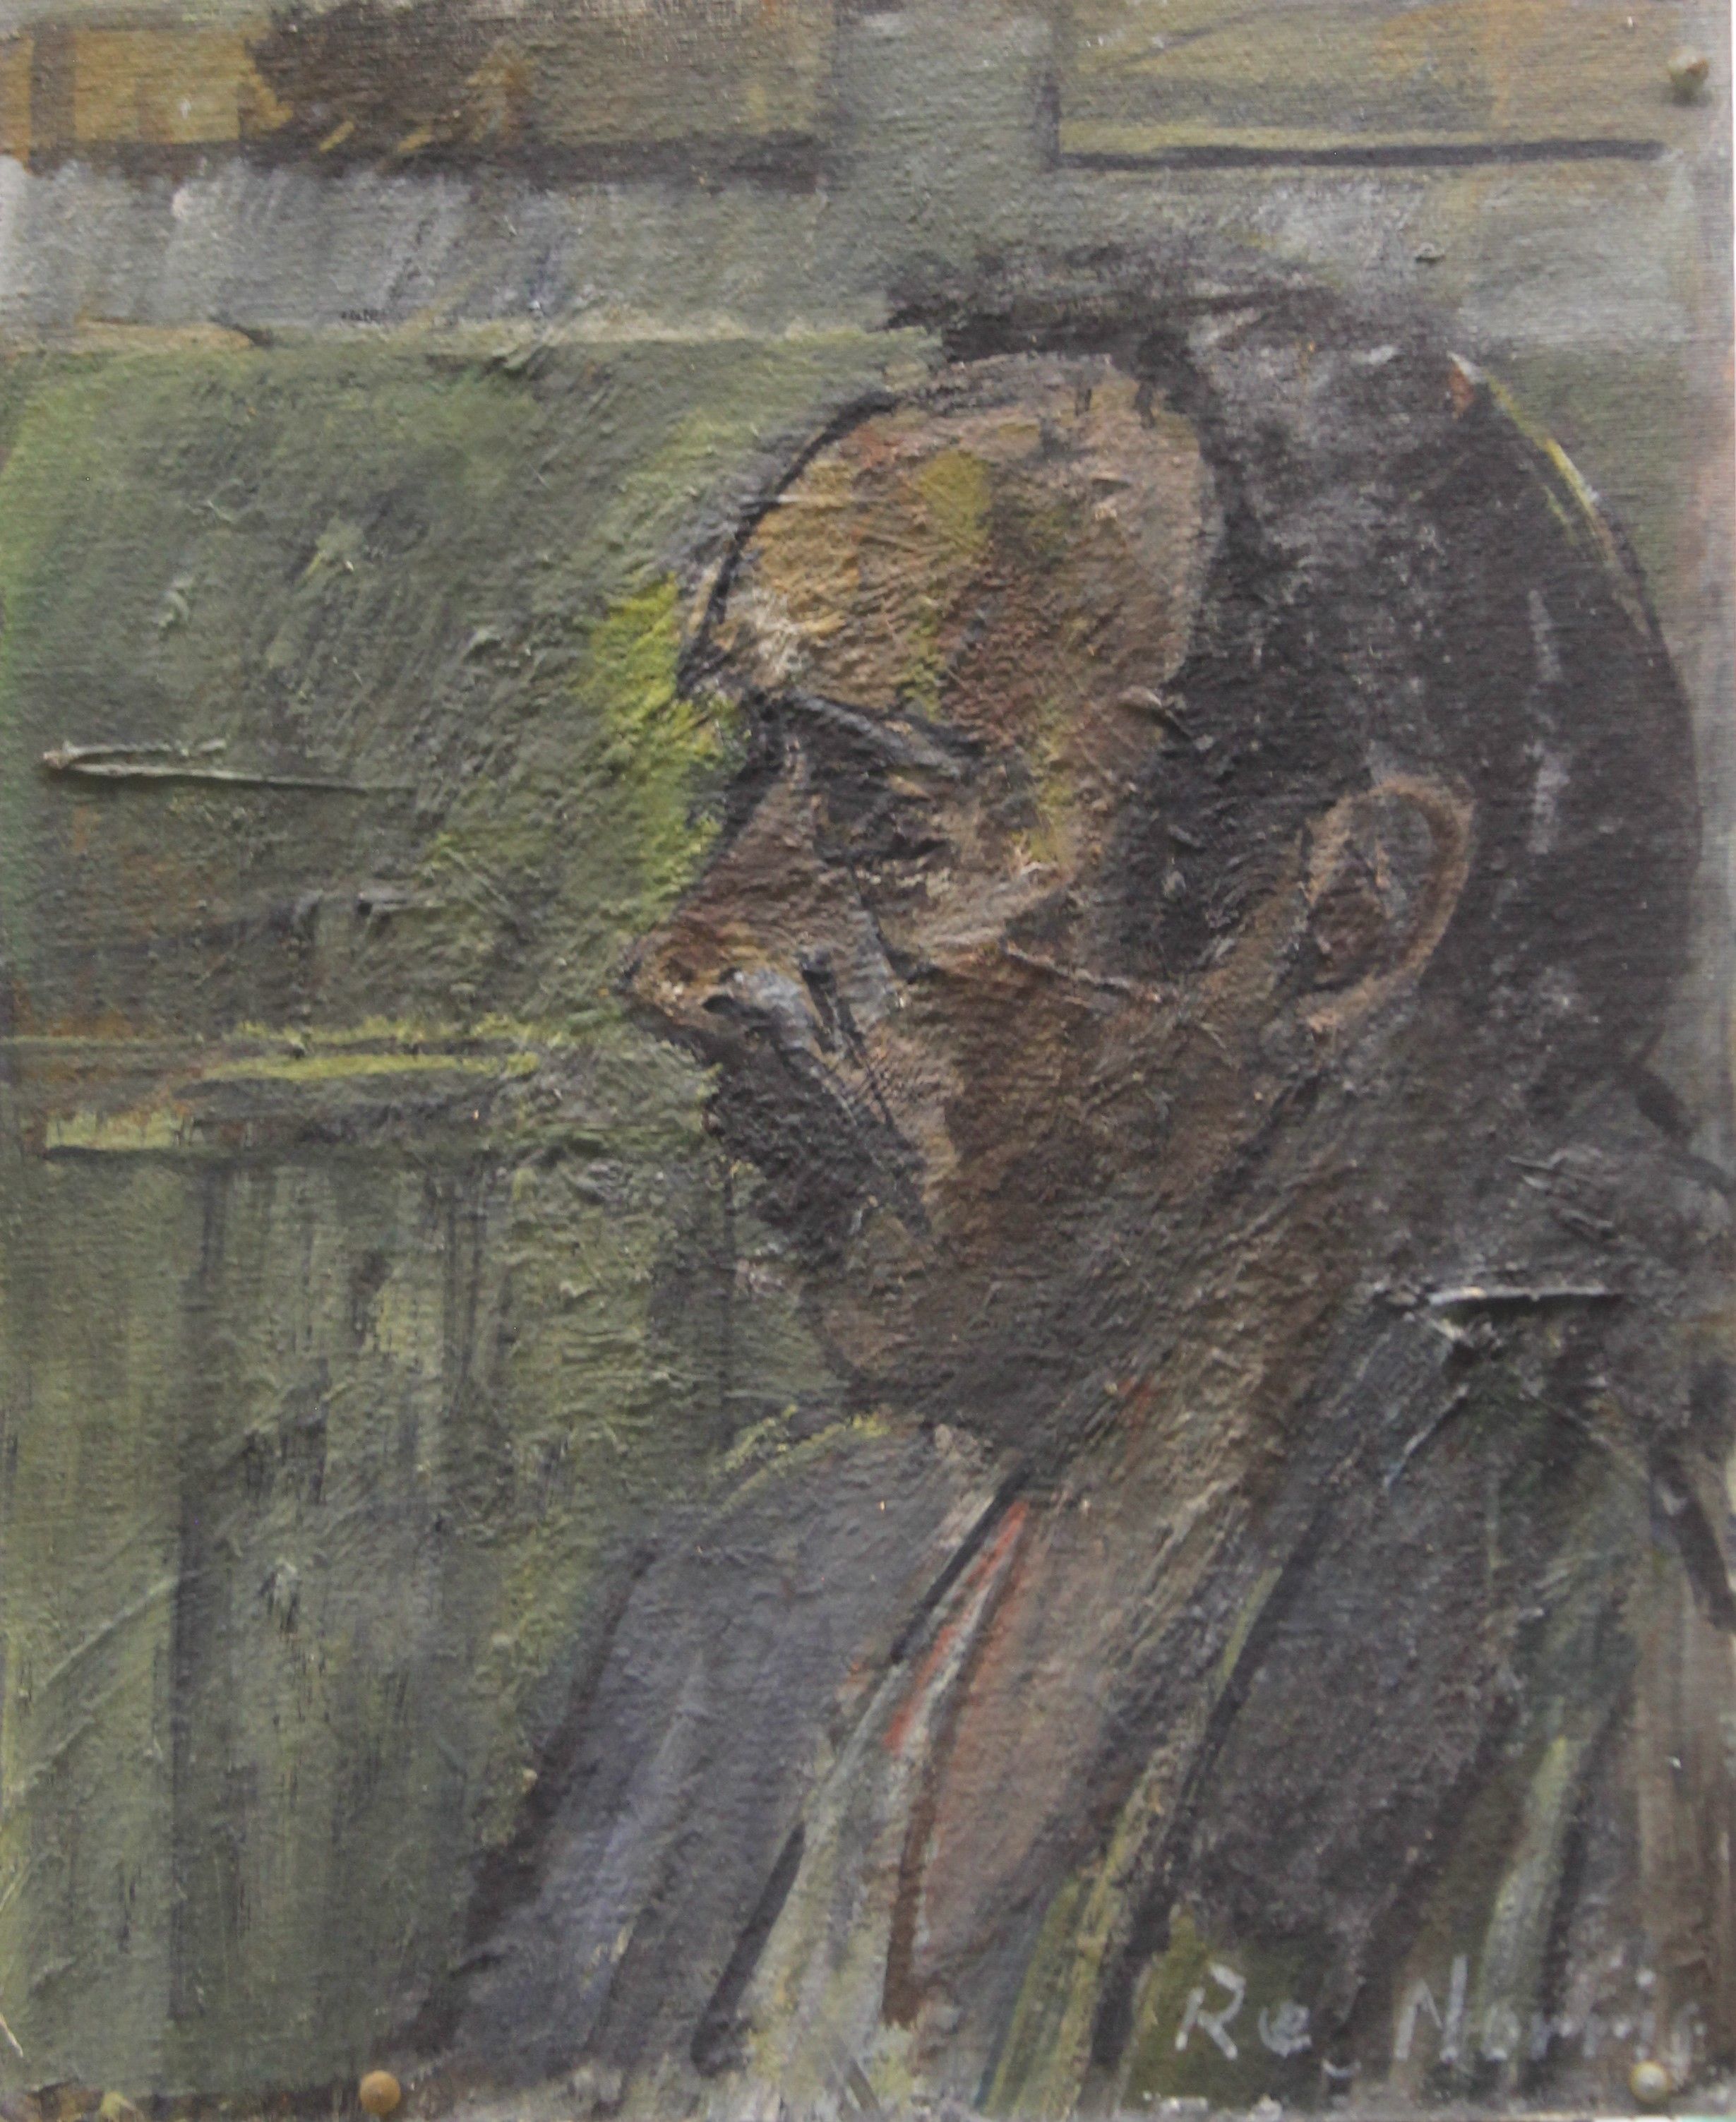 REG NORRIS British, The Bar and a Portrait of a Man, the latter signed. The largest 51 x 41 cm. - Image 2 of 3